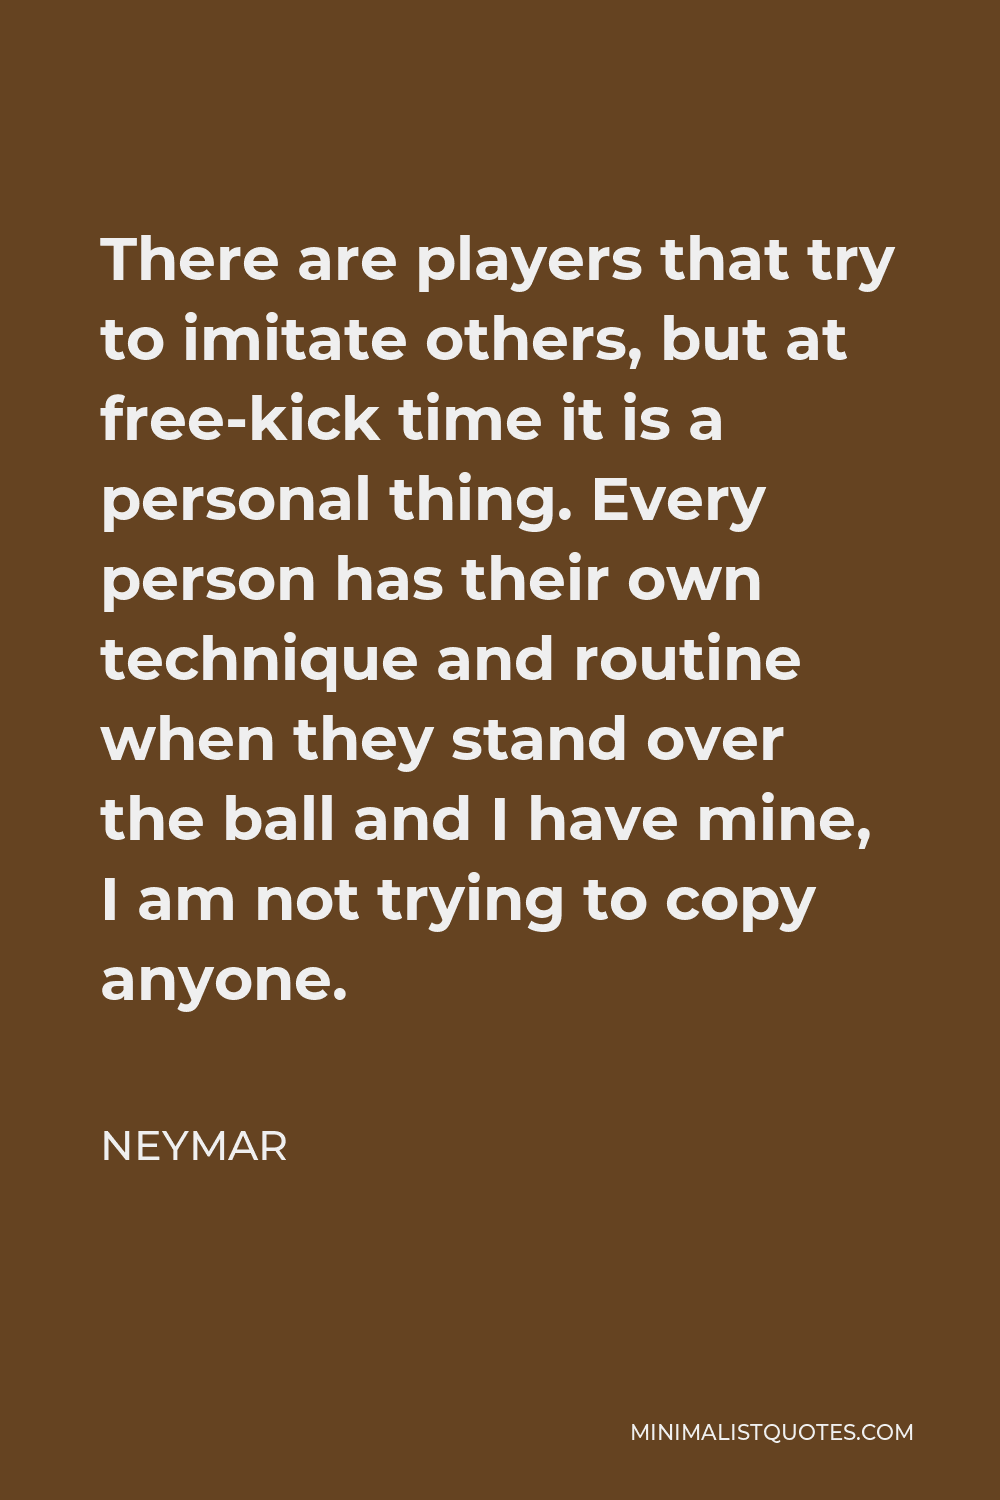 Neymar Quote - There are players that try to imitate others, but at free-kick time it is a personal thing. Every person has their own technique and routine when they stand over the ball and I have mine, I am not trying to copy anyone.